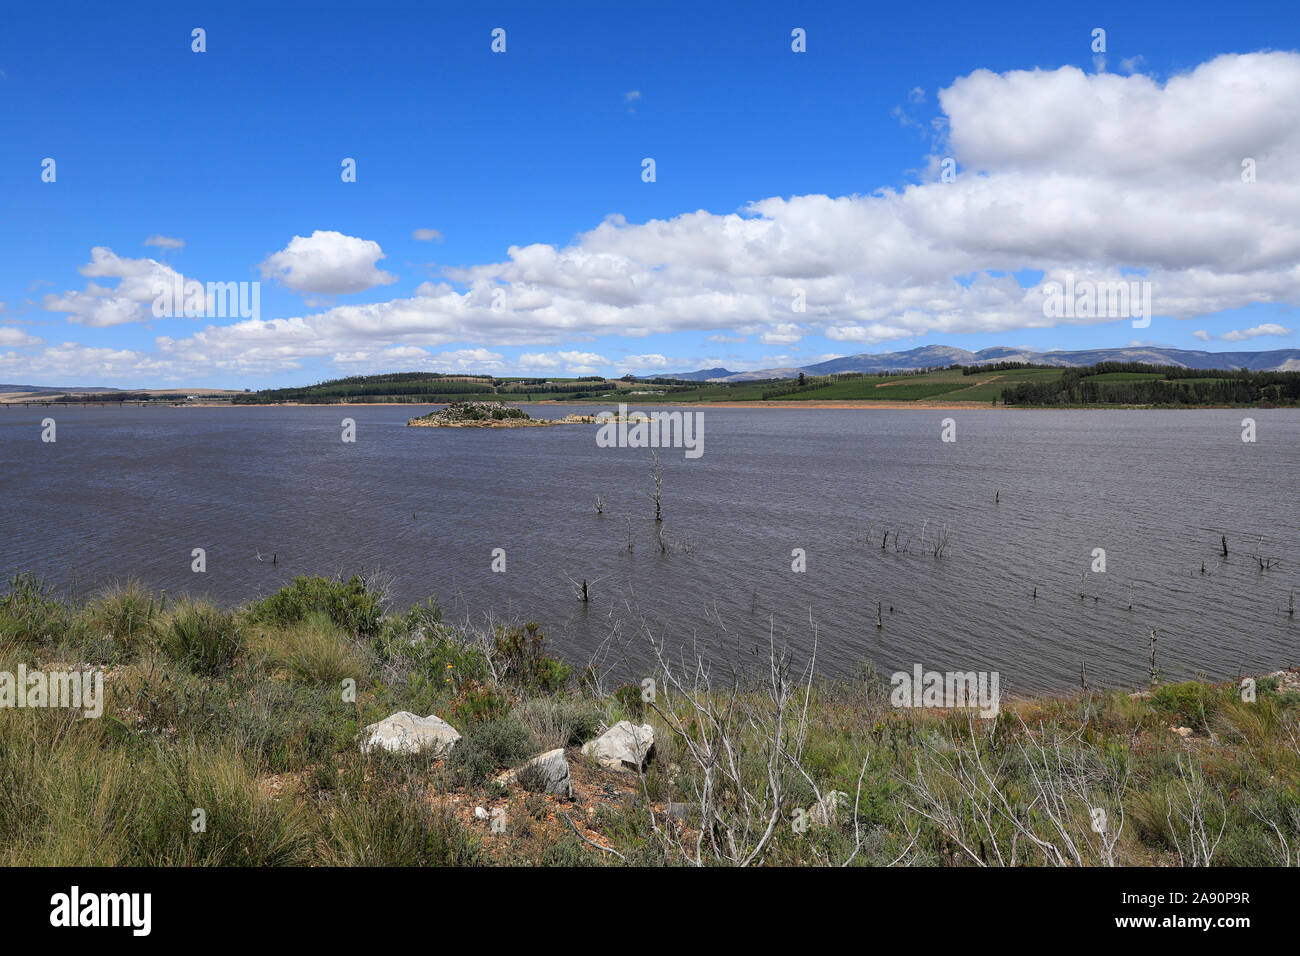 The Theewaterskloof dam near Villiersdorp in the Western Cape Province of South Africa showing recovery of the water level after the recent drought. Stock Photo